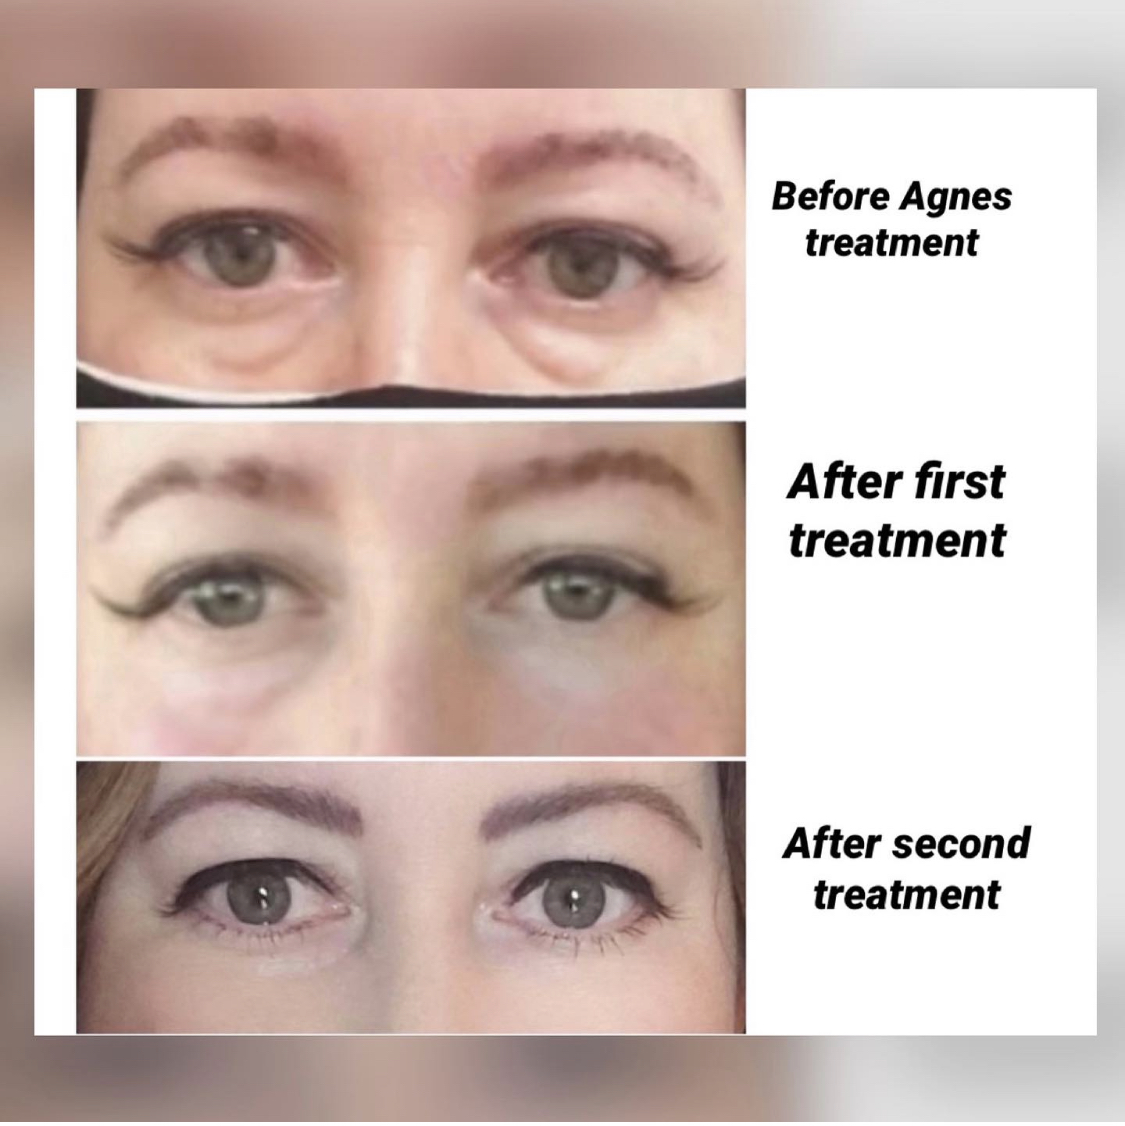 Agnes (Radiofrequency plus Microneedling) treatment for under eye bags